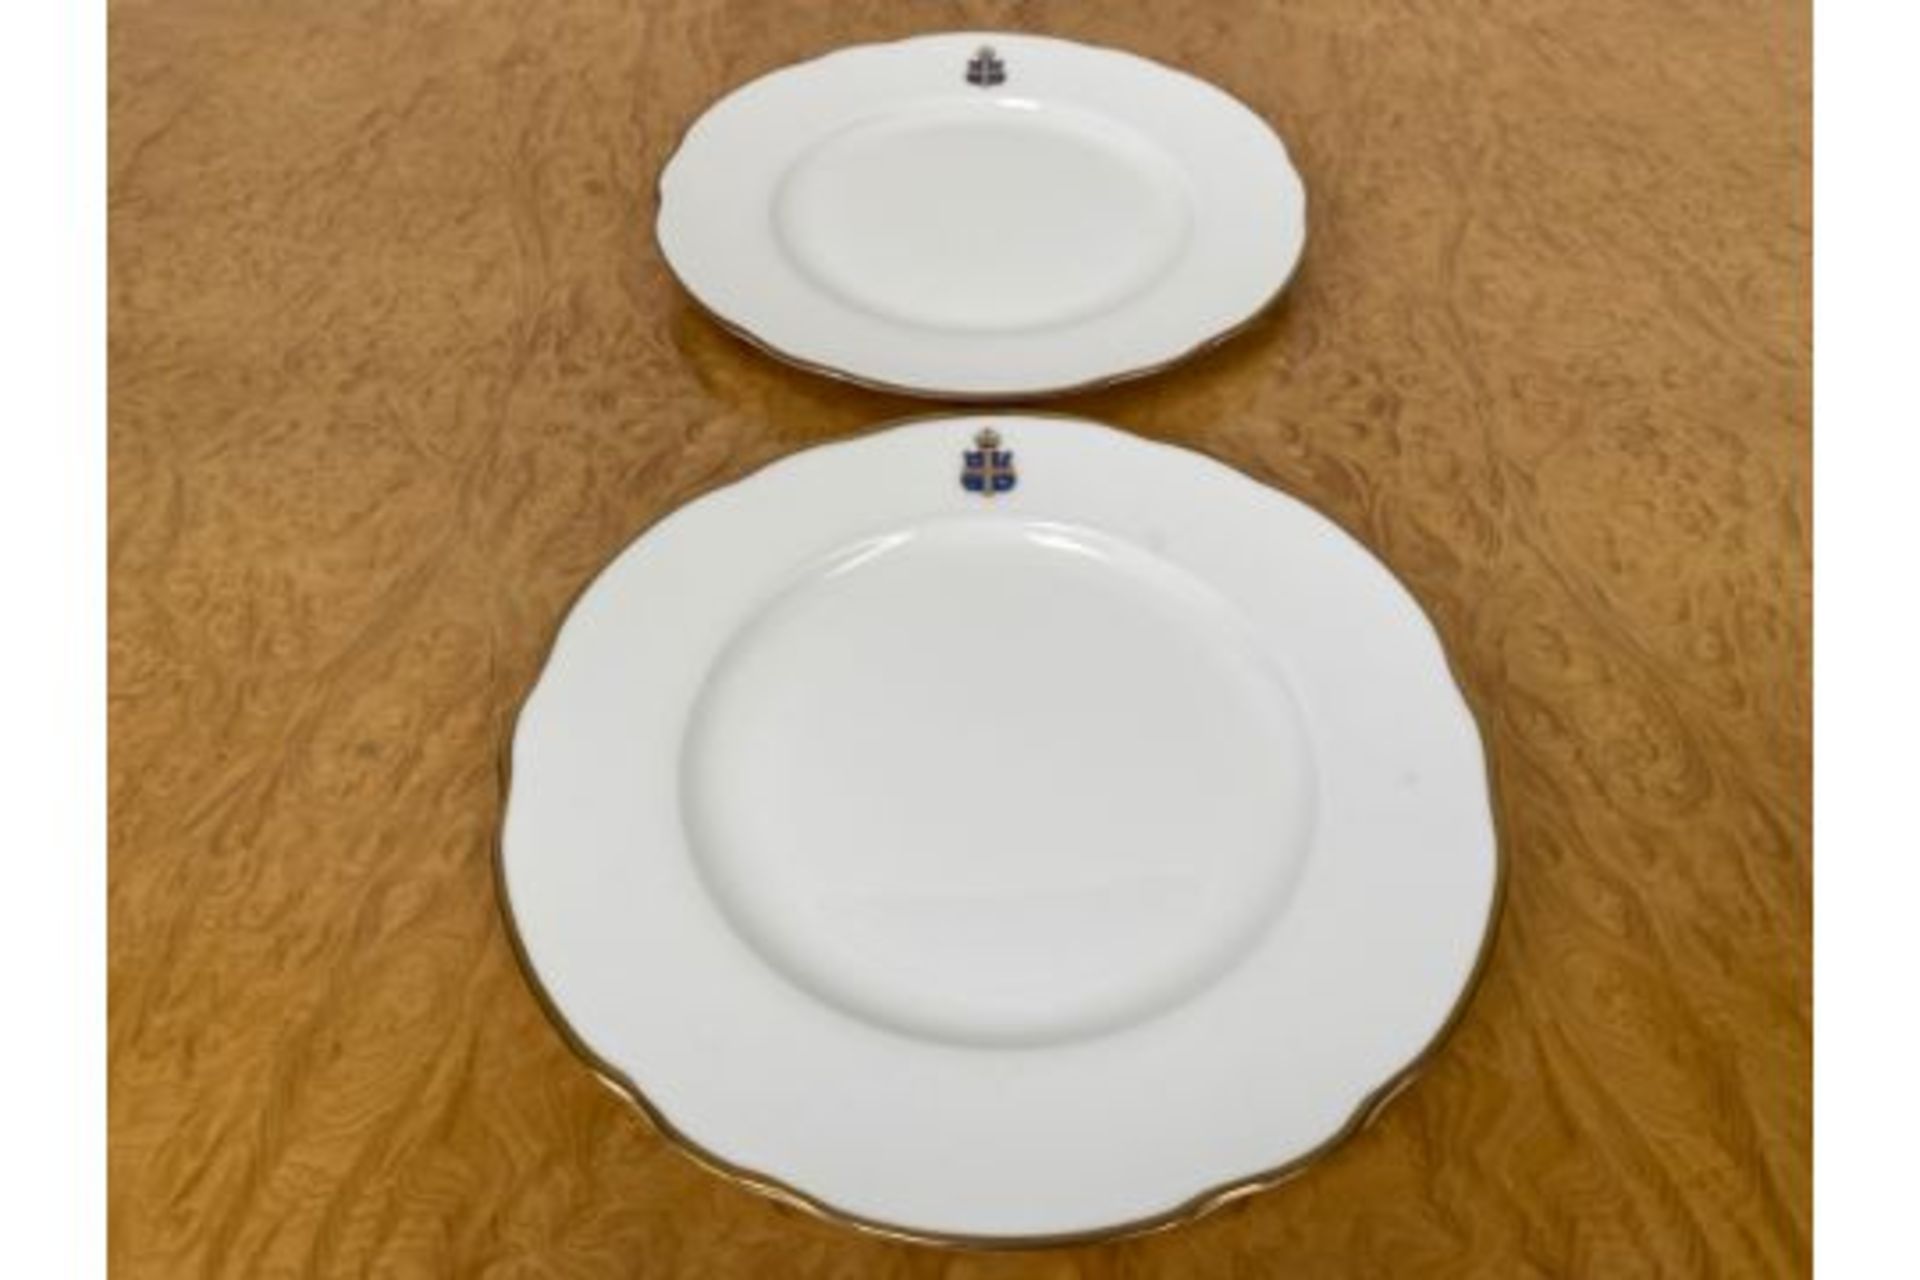 Set of Crested Crockery for Claridge's by Chommette 1884 - Image 3 of 6